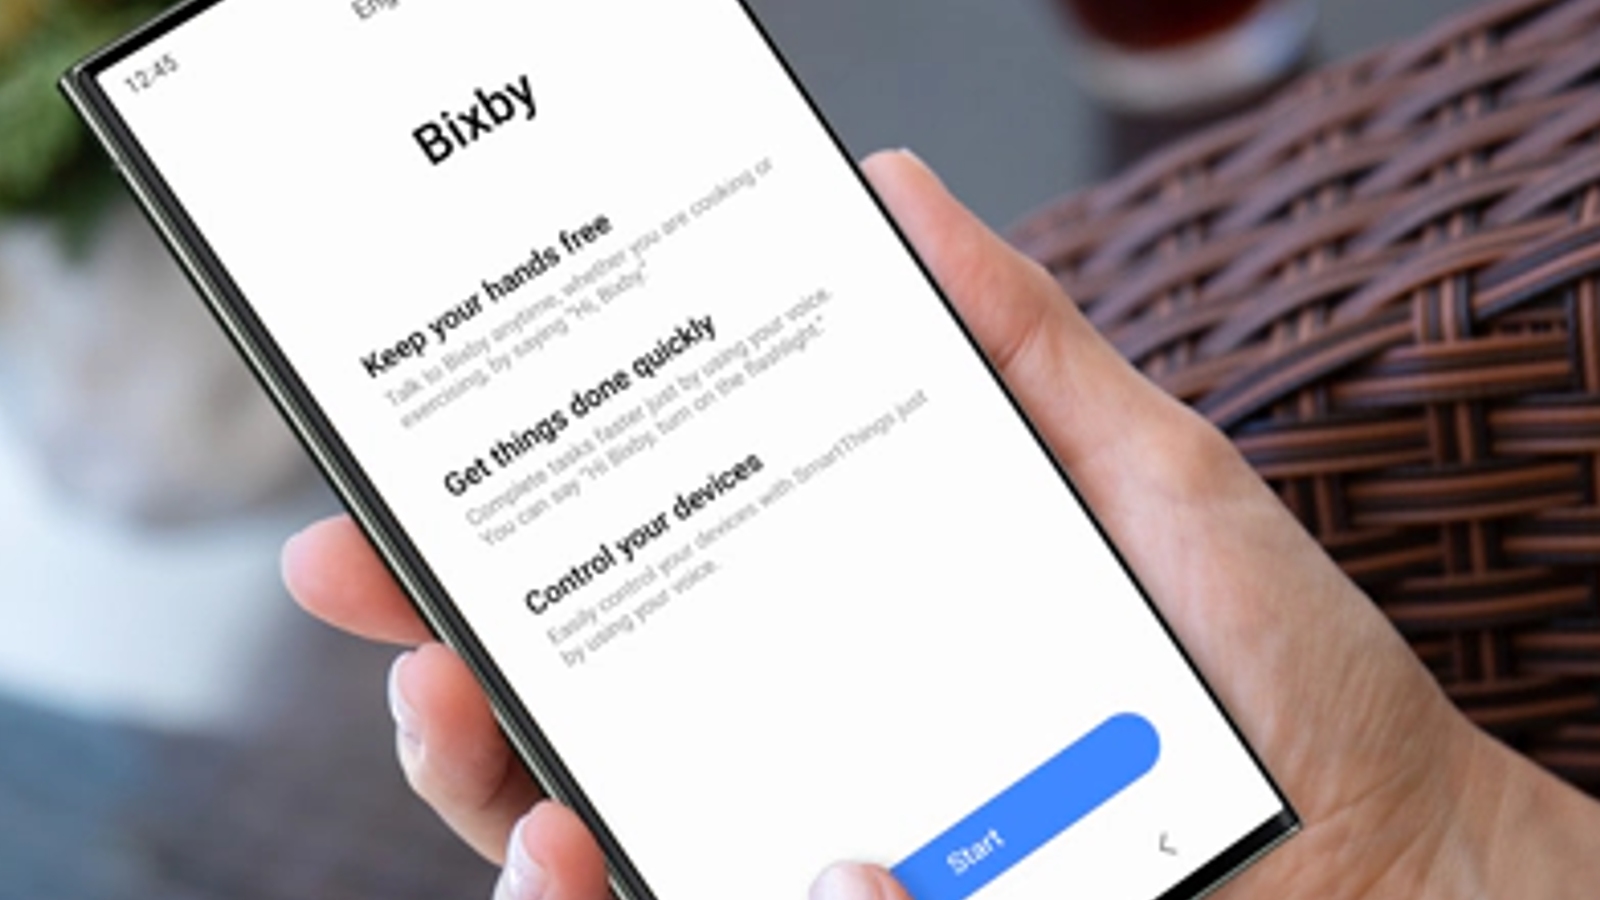 Samsung to supercharge Bixby AI assistant with Gen AI capabilities | Technology News